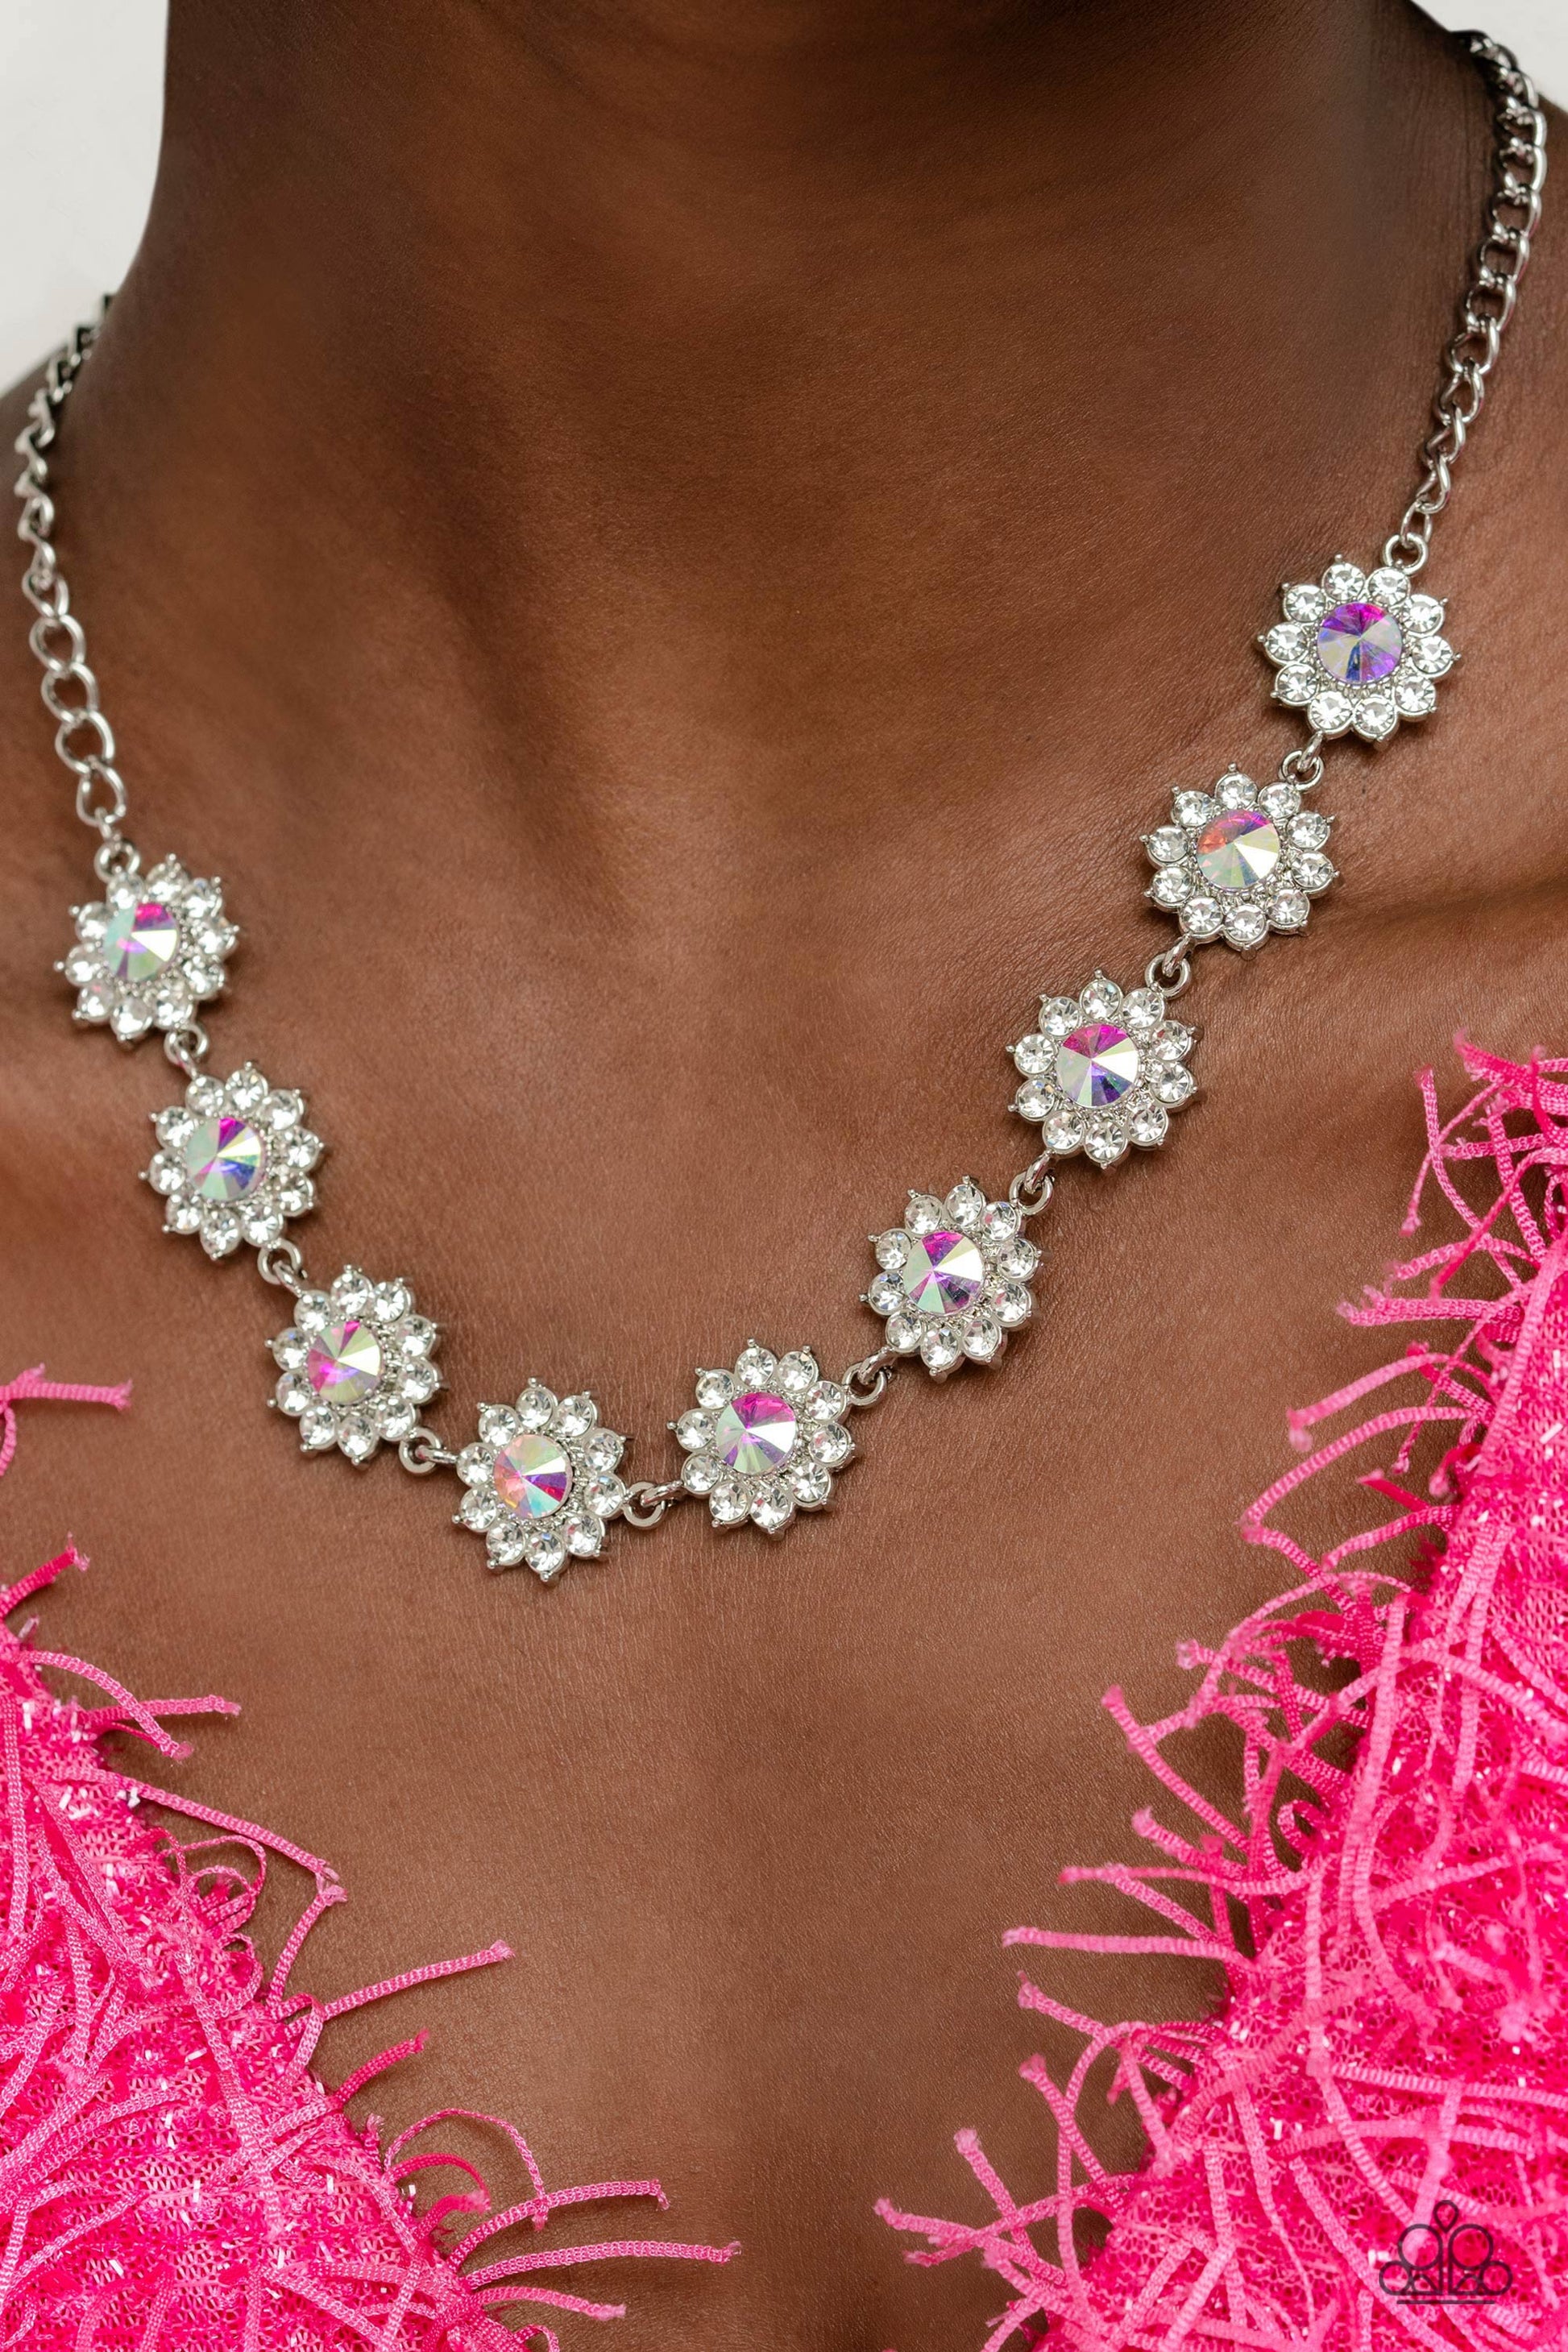 Blooming Brilliance - multi - Paparazzi necklace